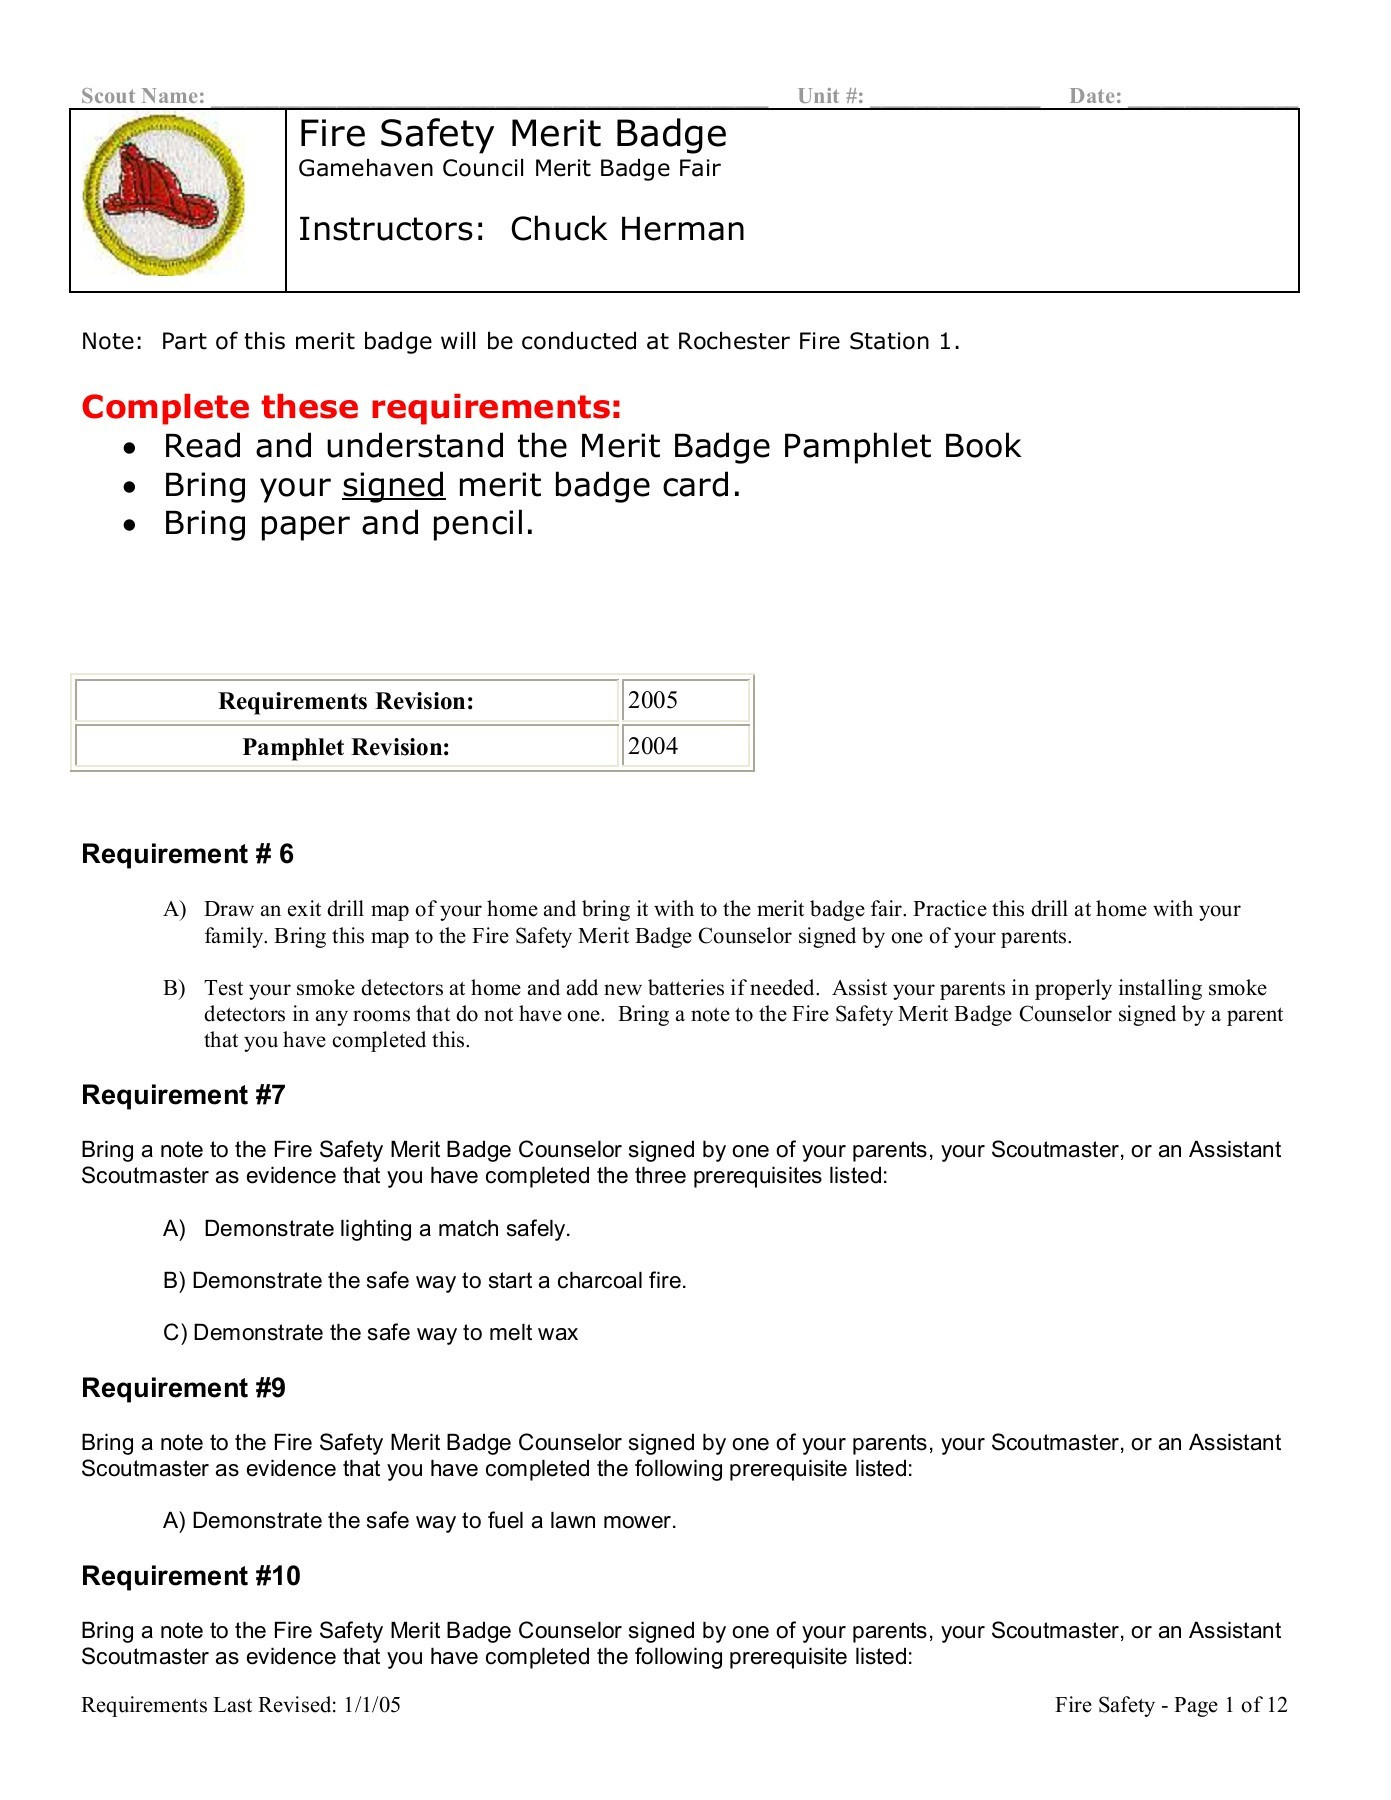 Fire Safety Merit Badge Worksheet Fire Safety Merit Badge Scouting In Minnesota Pages 1 12